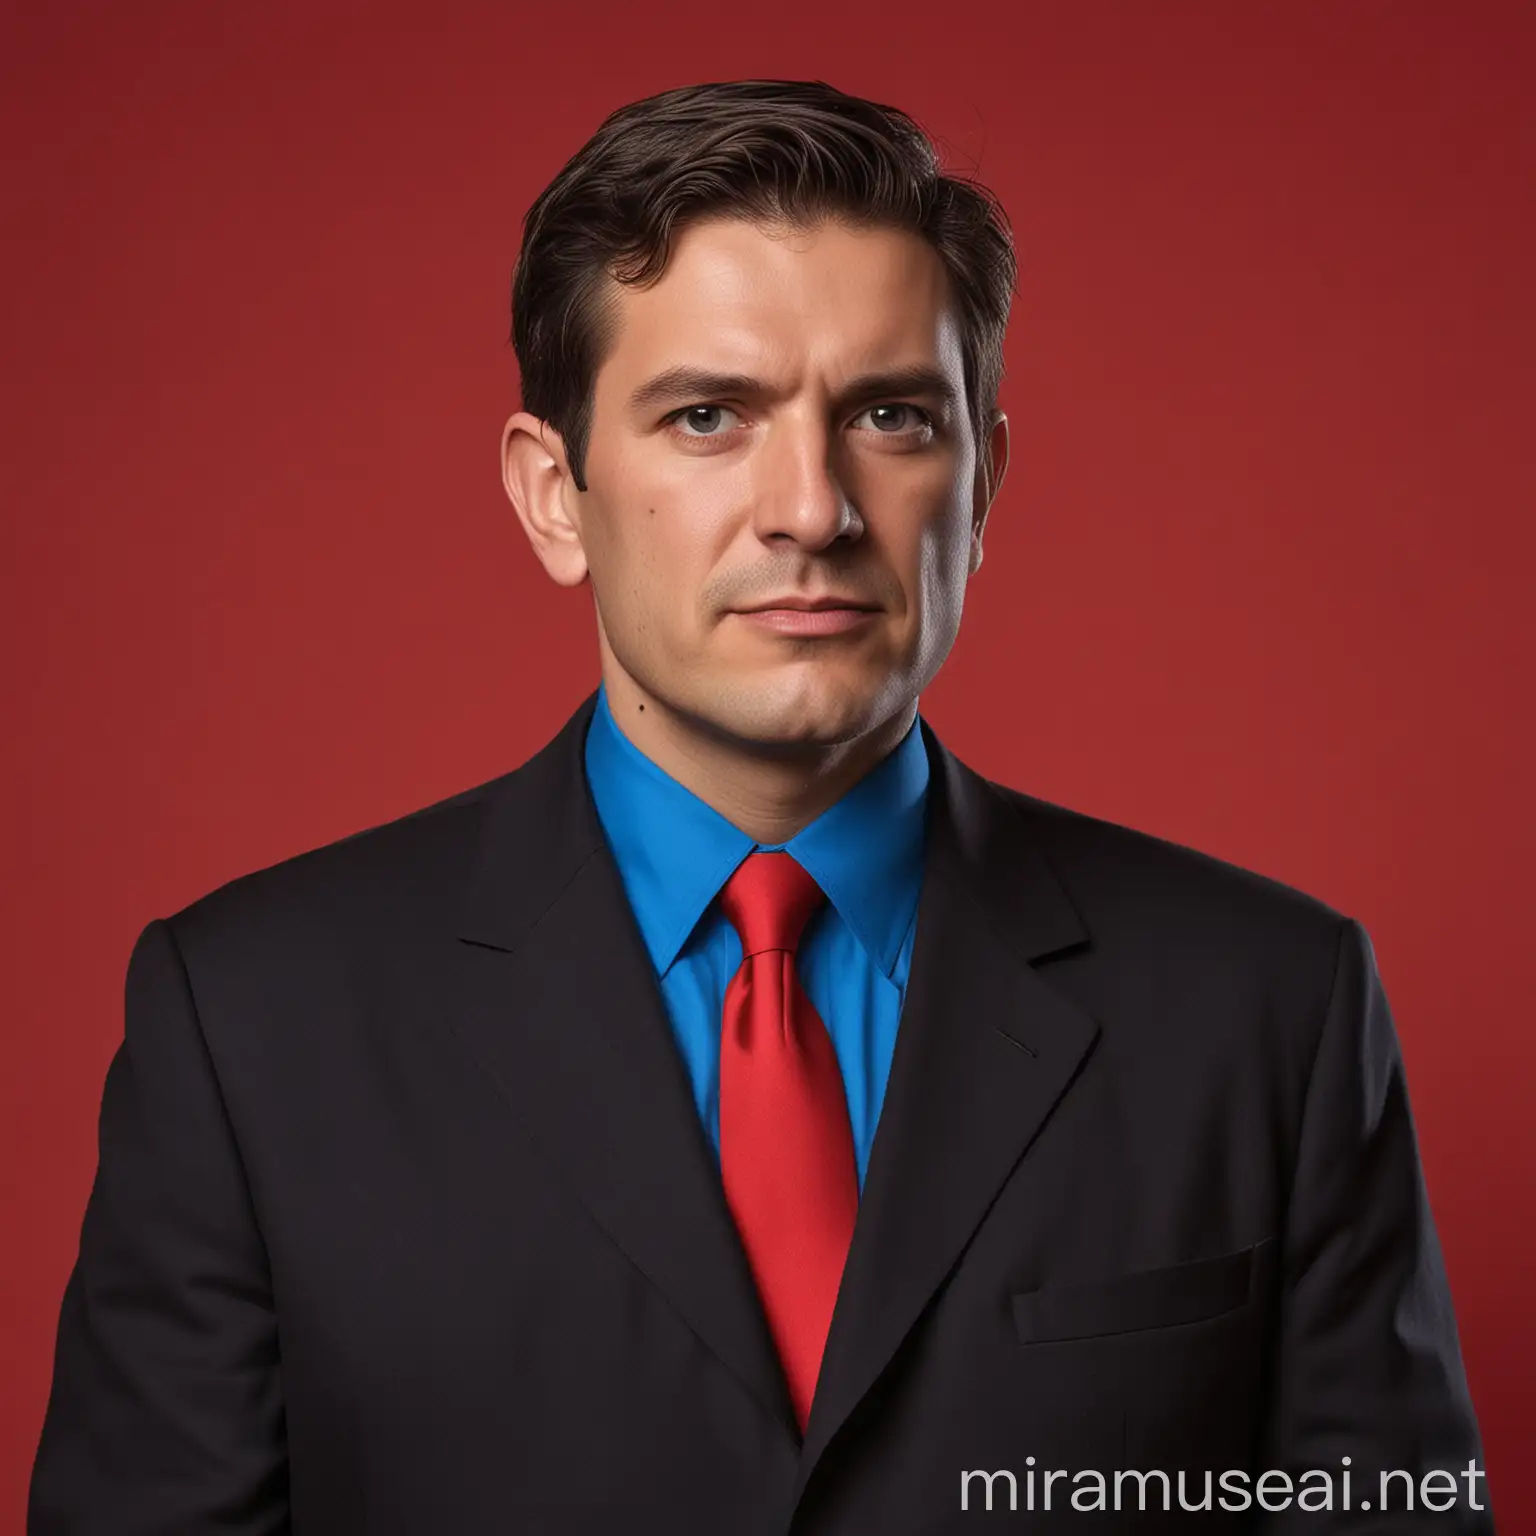 Politician in Black Suit and Blue Shirt on Red Background